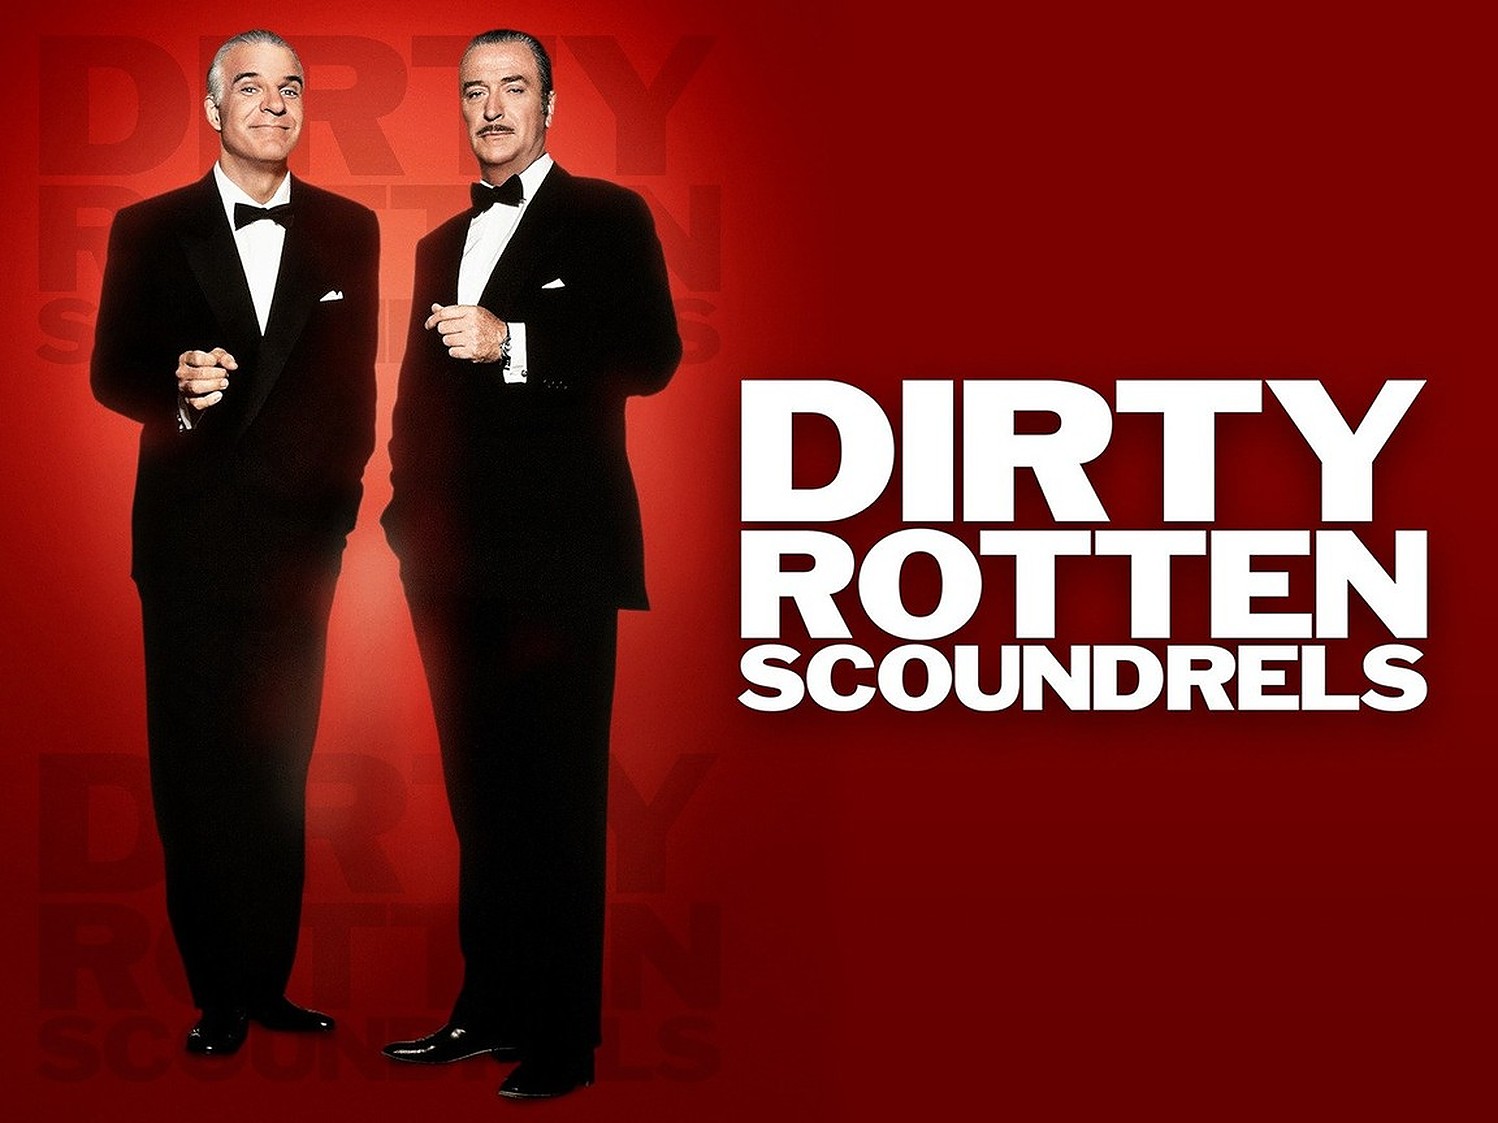 40-facts-about-the-movie-dirty-rotten-scoundrels